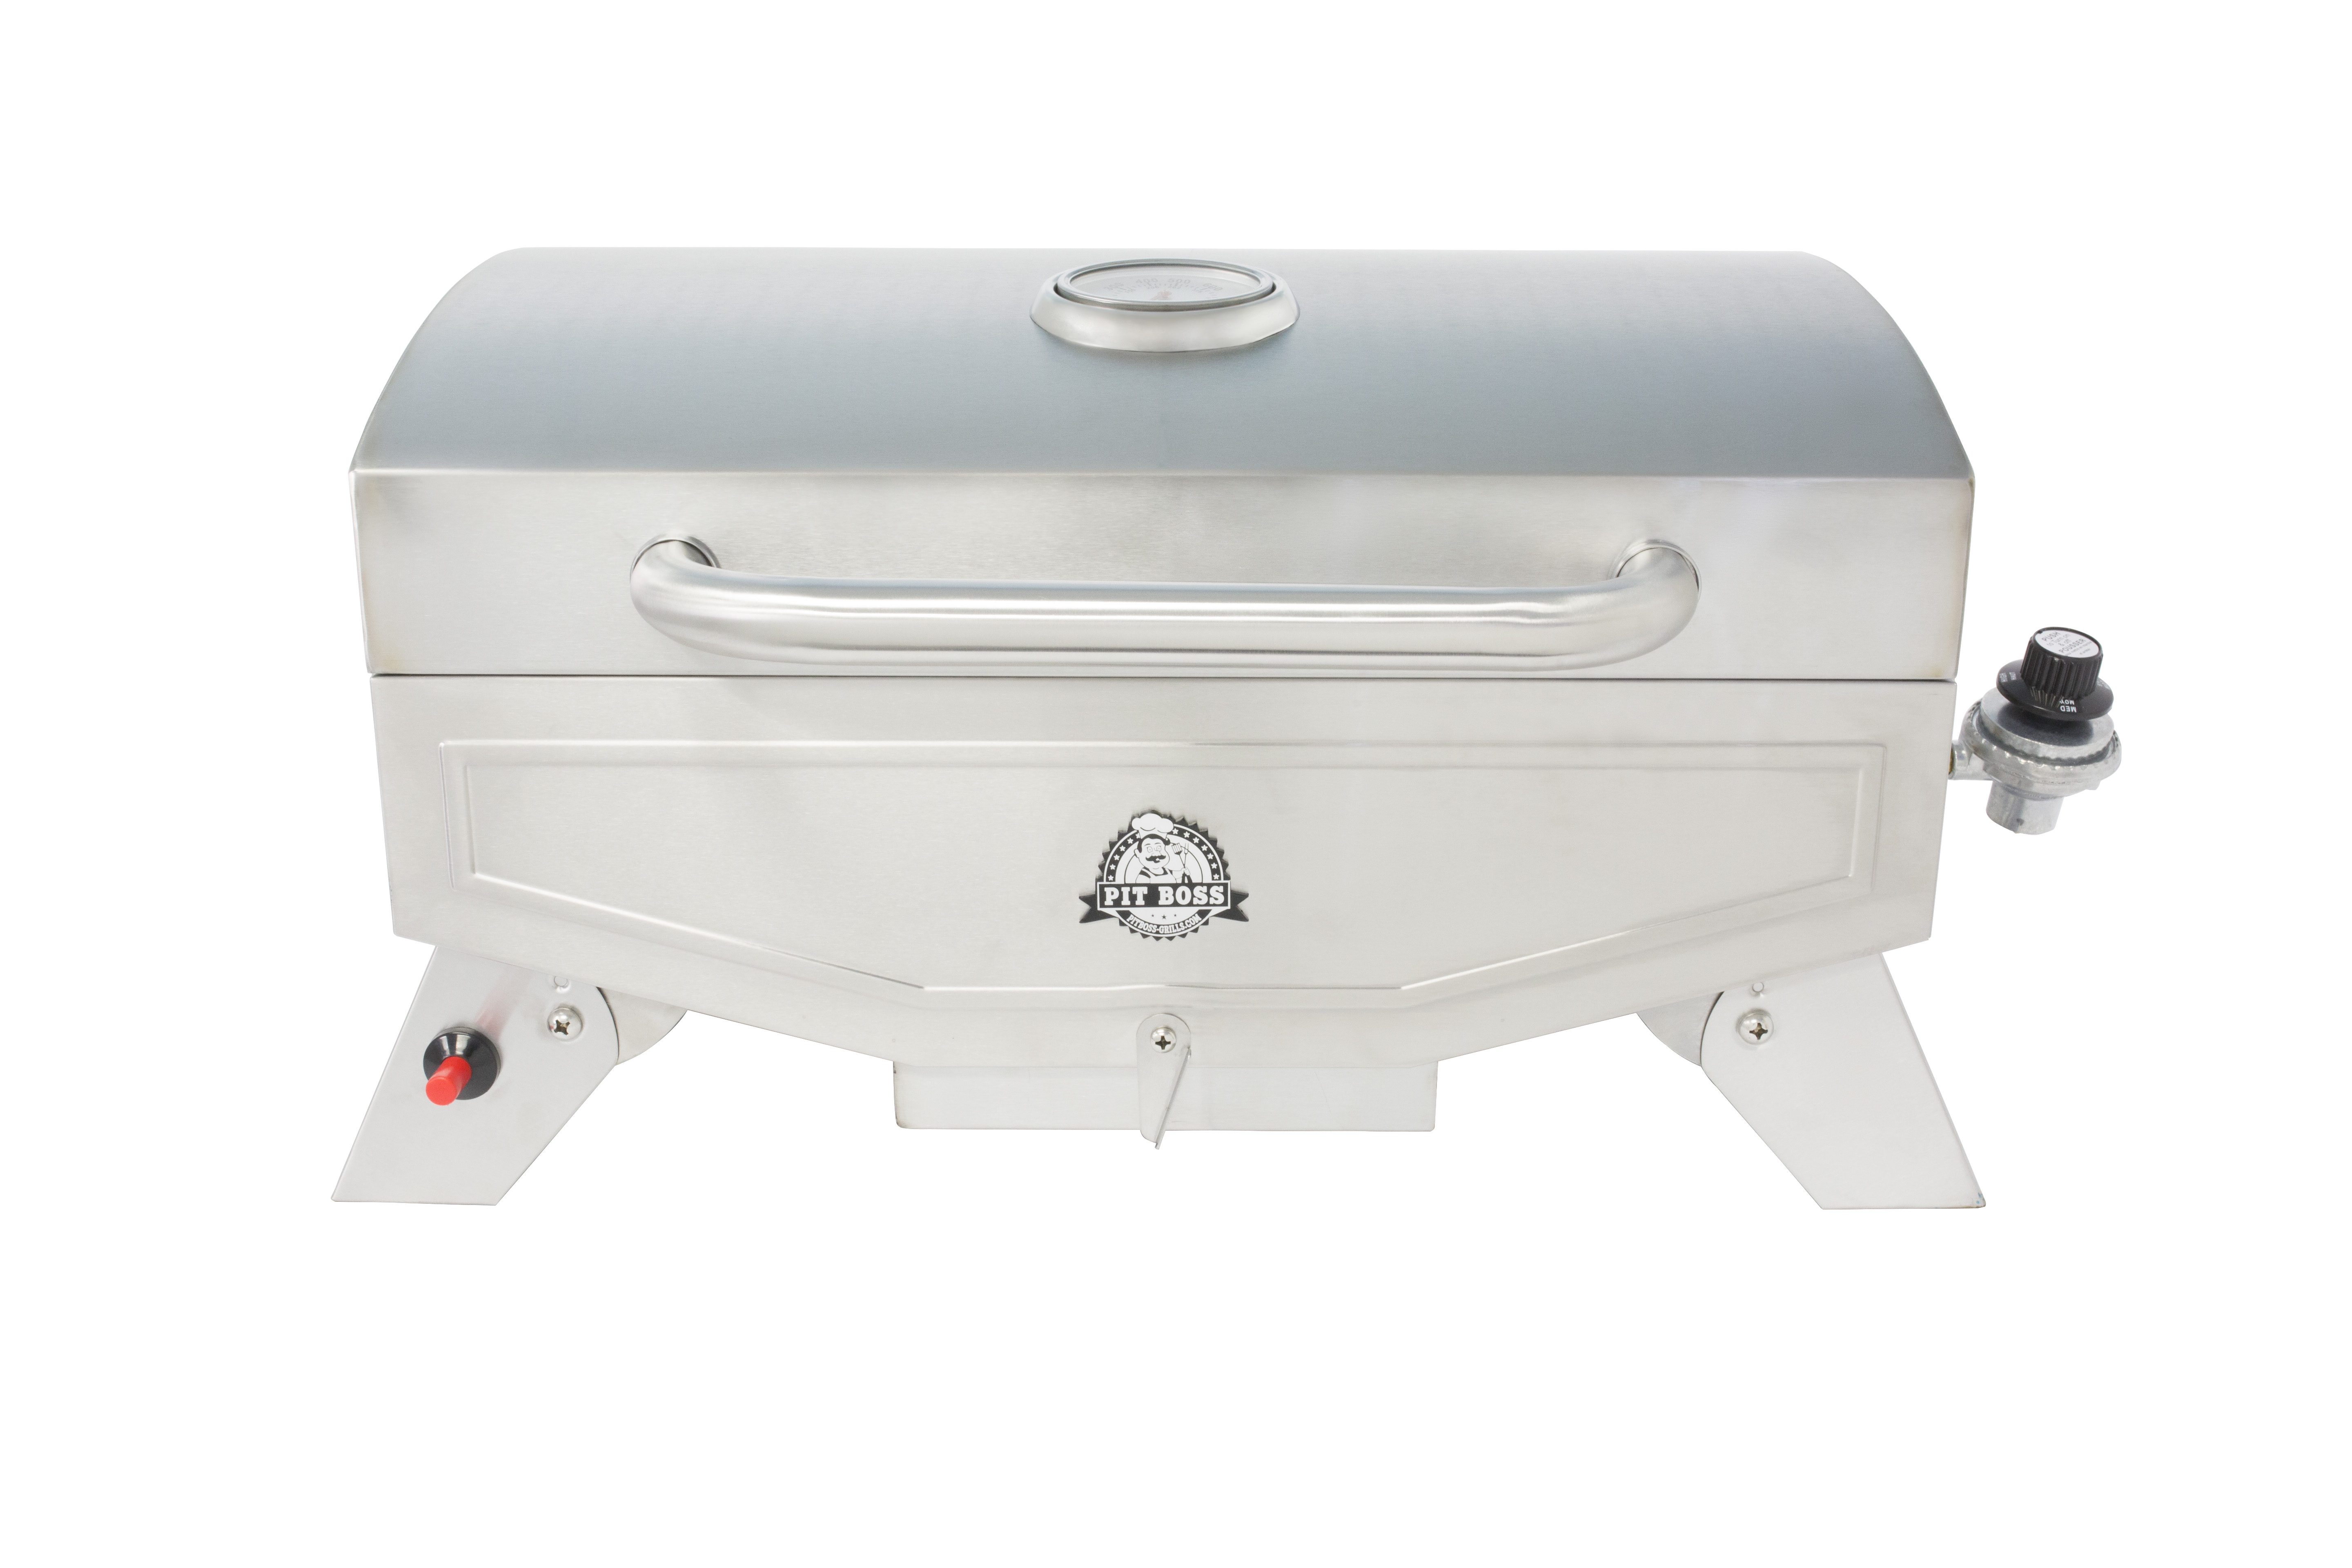 Pit Boss Single-Burner Portable Gas Grill - image 1 of 8